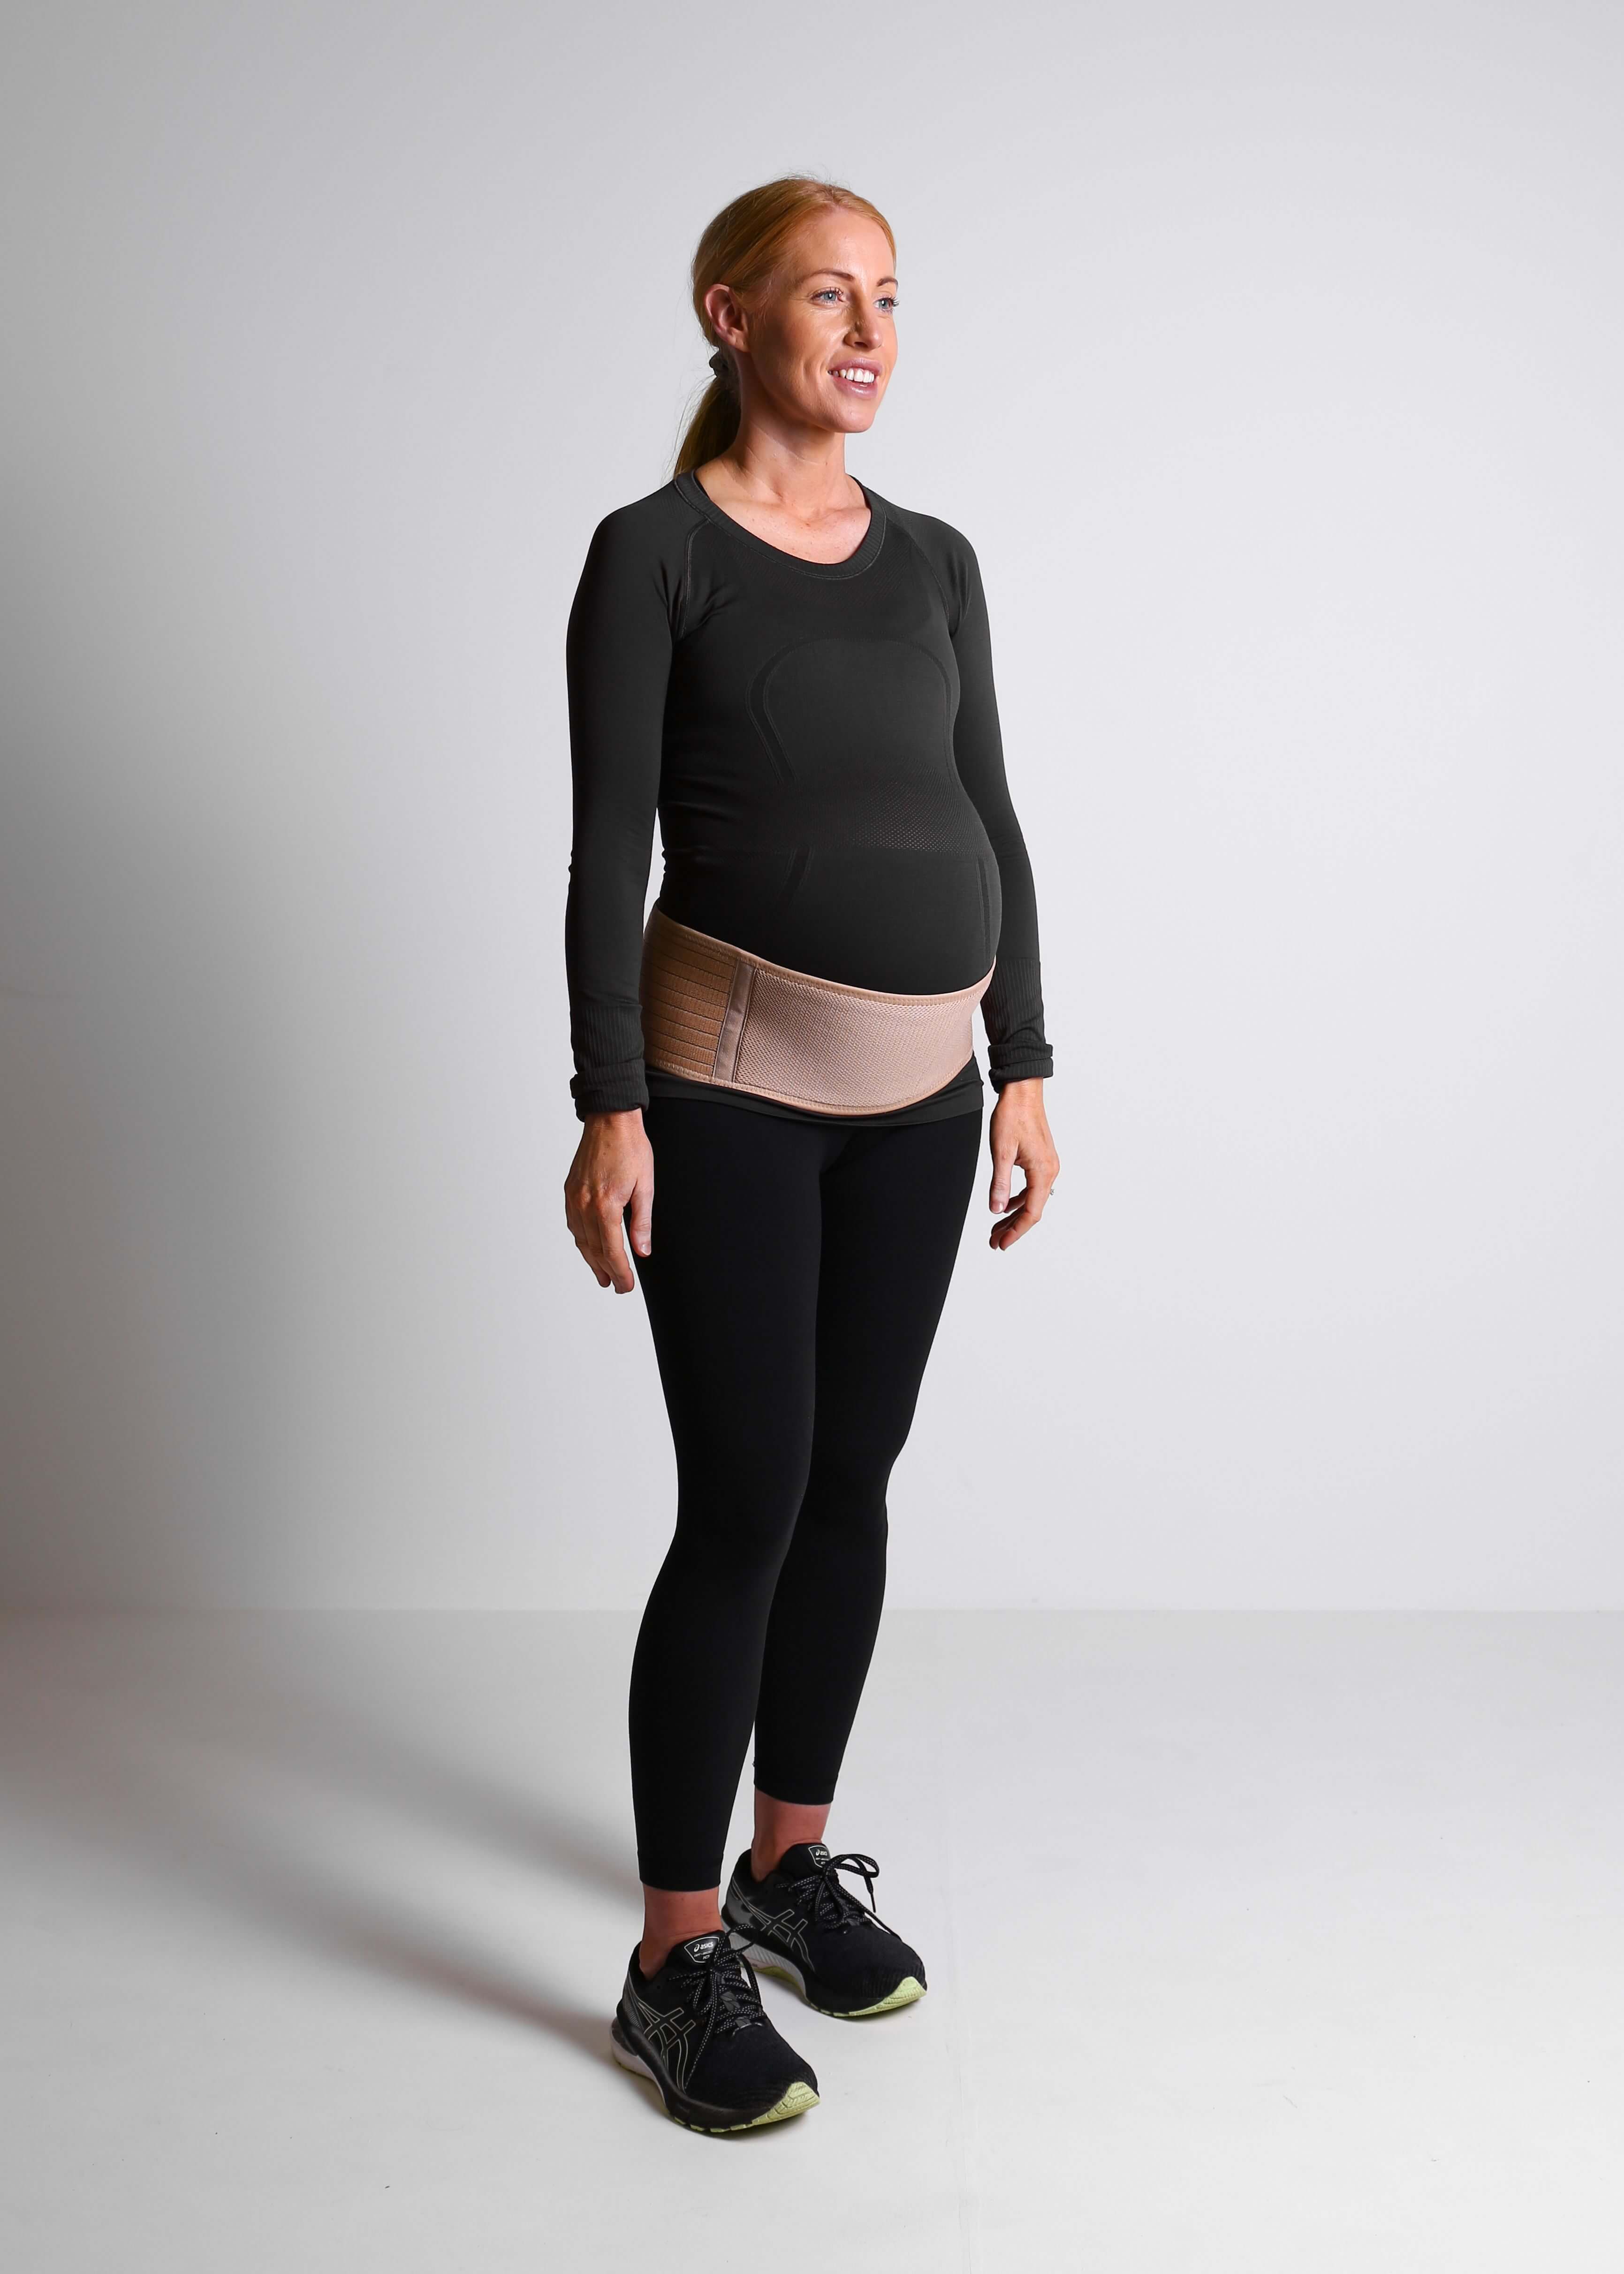 Restore - Pregnancy compression sleeve - Bespoke Physiotherapy